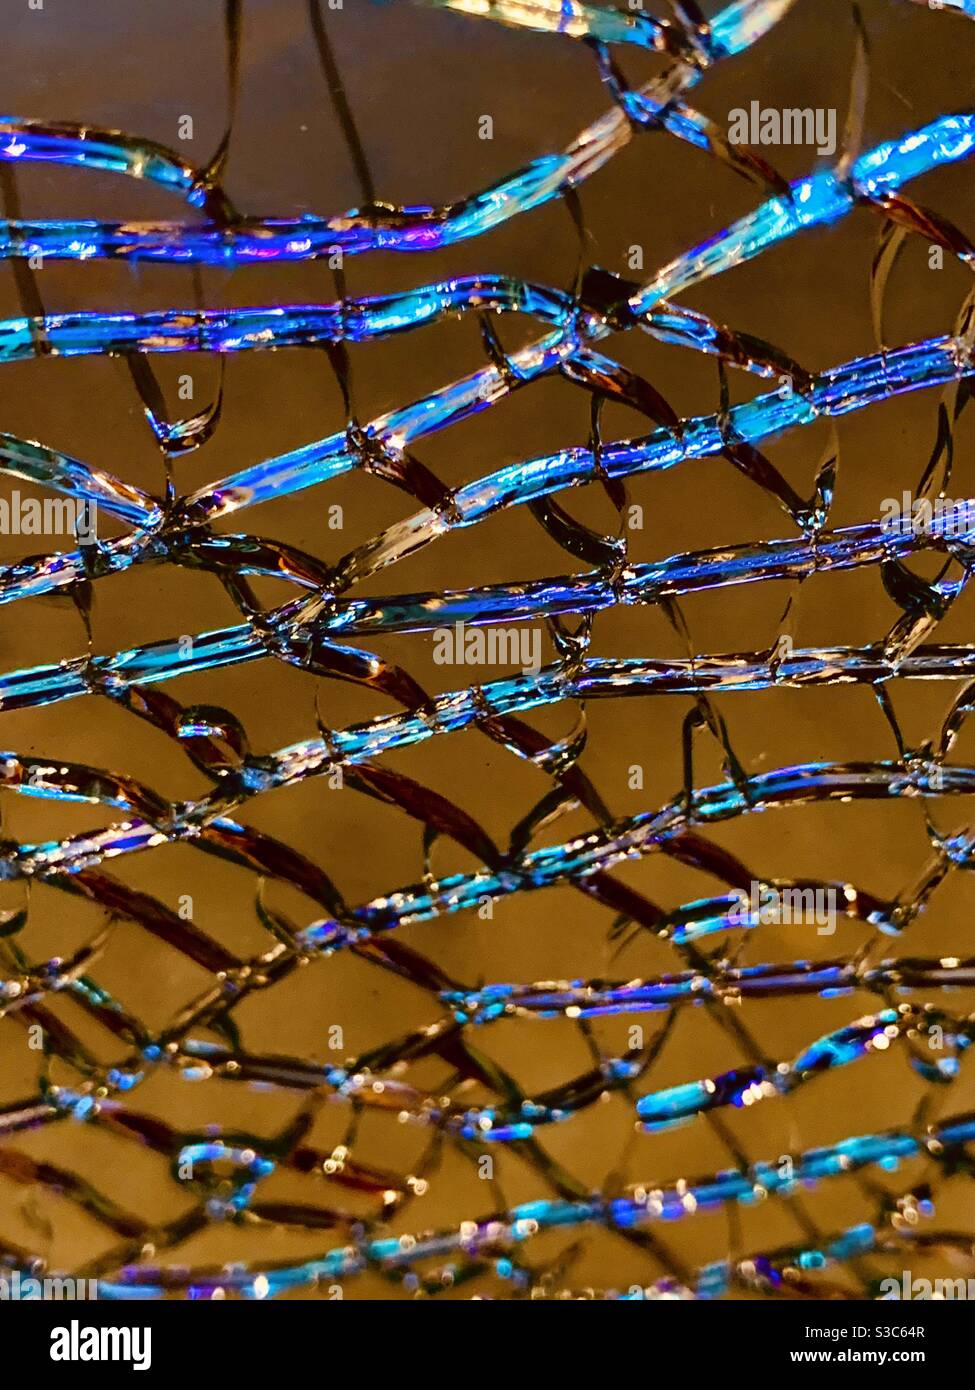 Shattered glass with colourful turquoise refractions Stock Photo